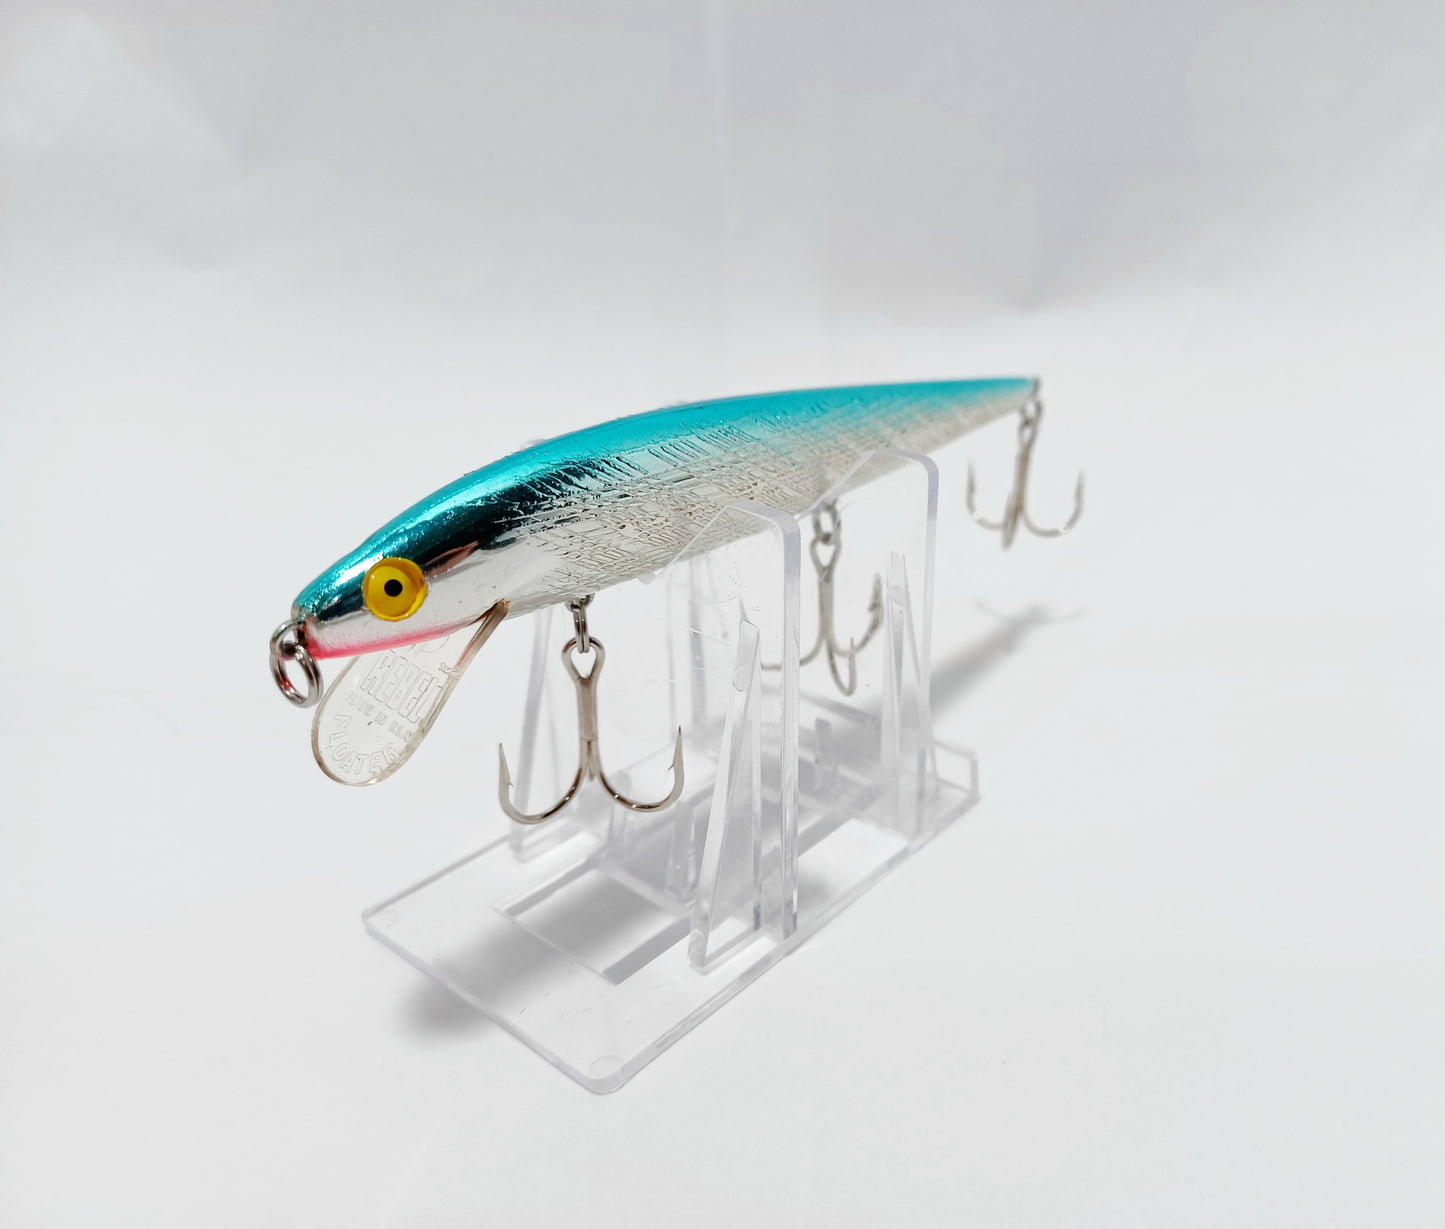 Vintage Rebel minnow floating lure 4.5" F2003s Blue Silver